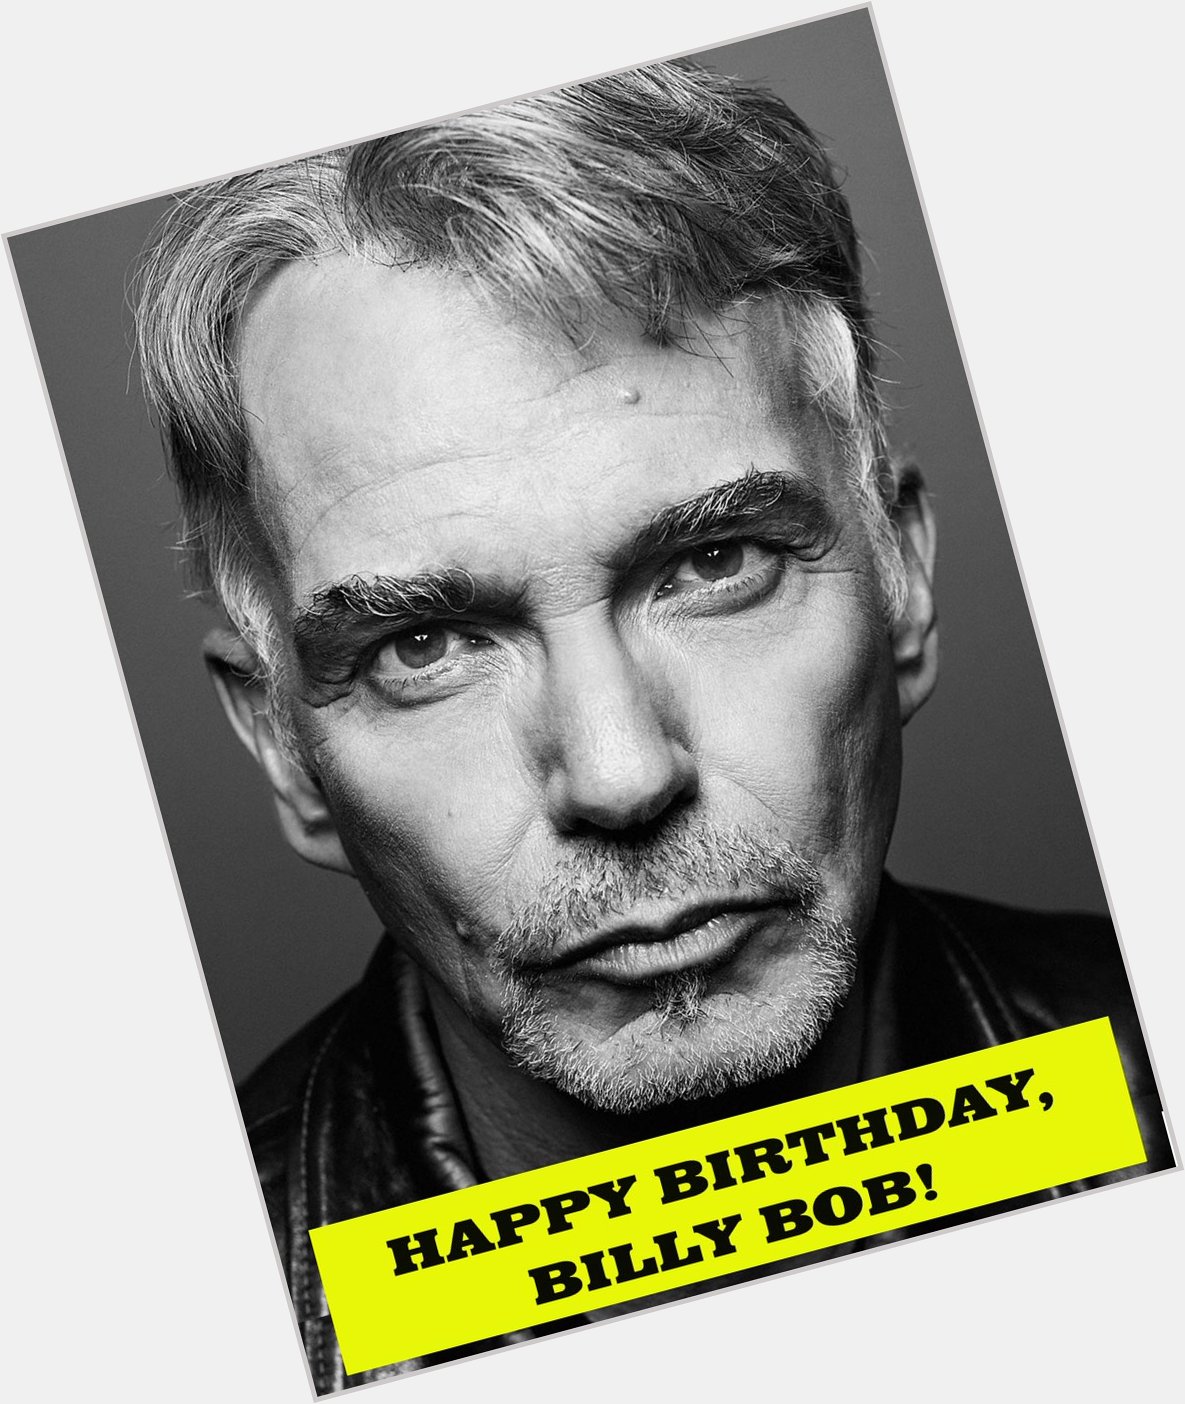 Movie Loft wishing a Happy Birthday to Billy Bob Thornton. As far as playing odd characters go, he s one to deliver. 